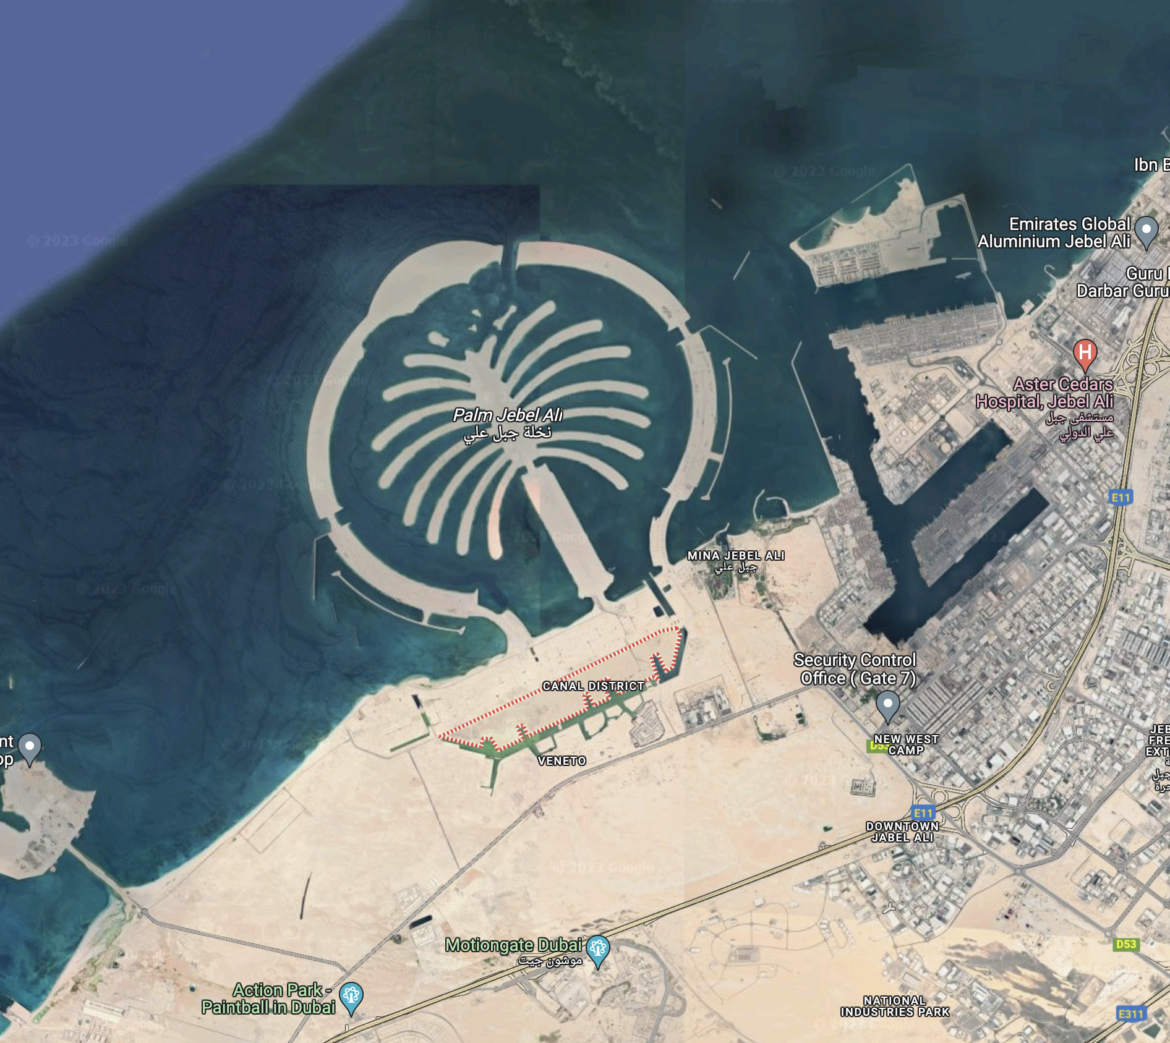 Palm Jebel Ali artificial islands in Dubai rise from the sand after 20 years